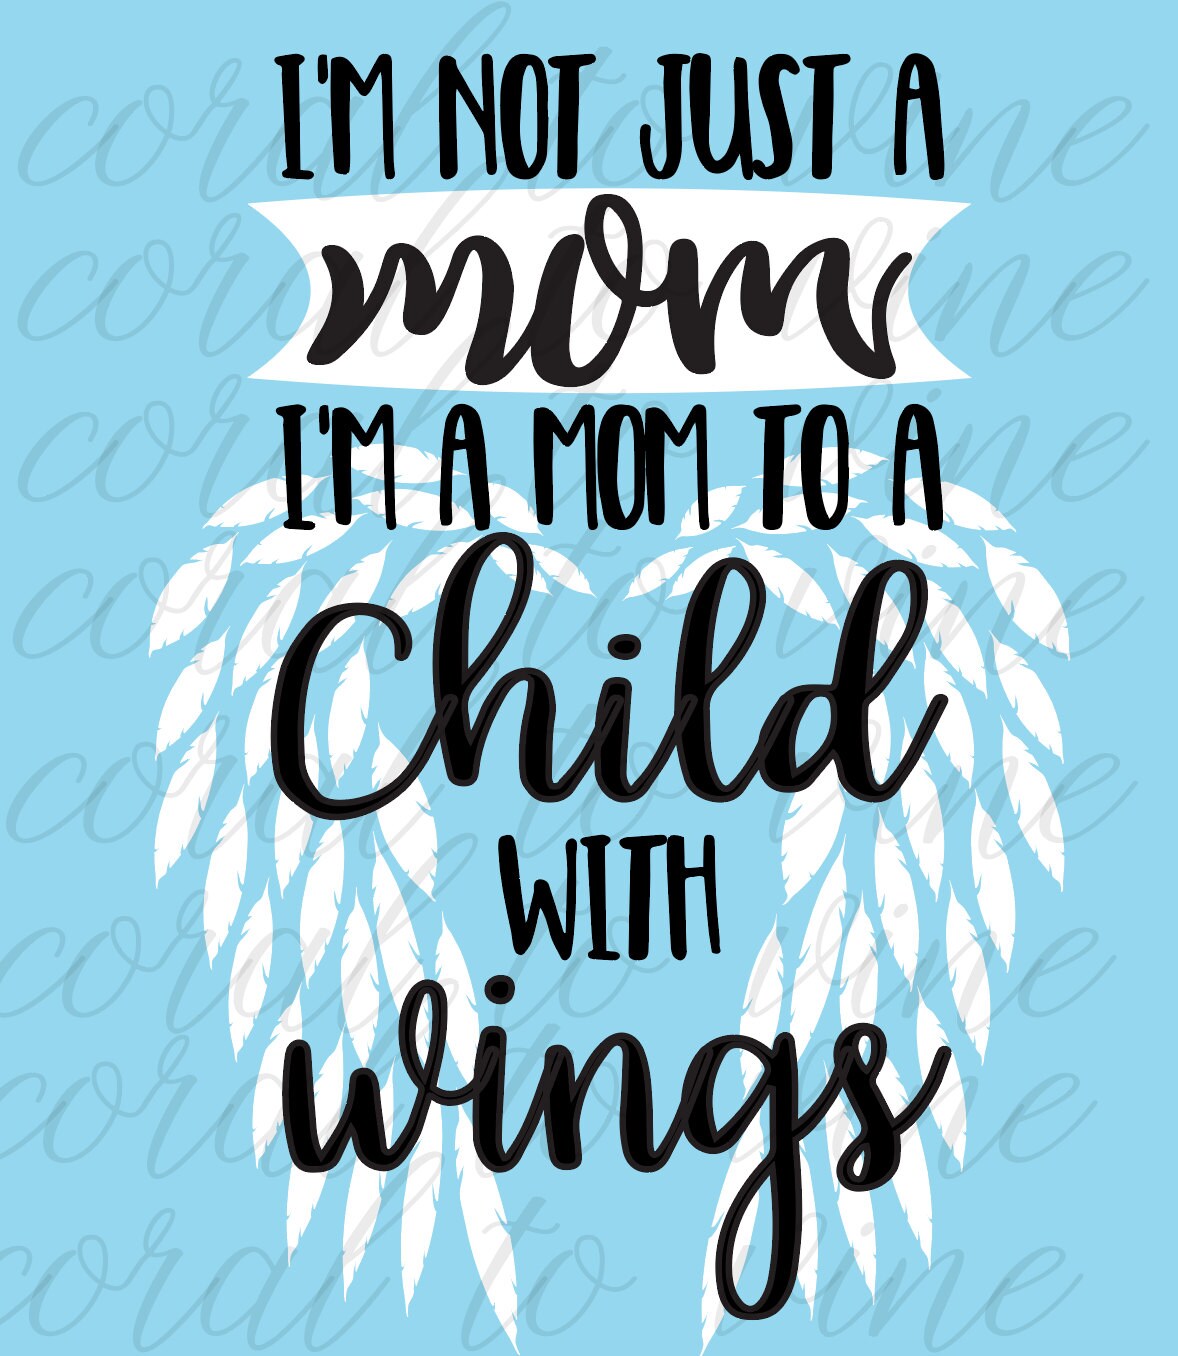 Download mom to child with wings SVG feather angel wings SVG feathers